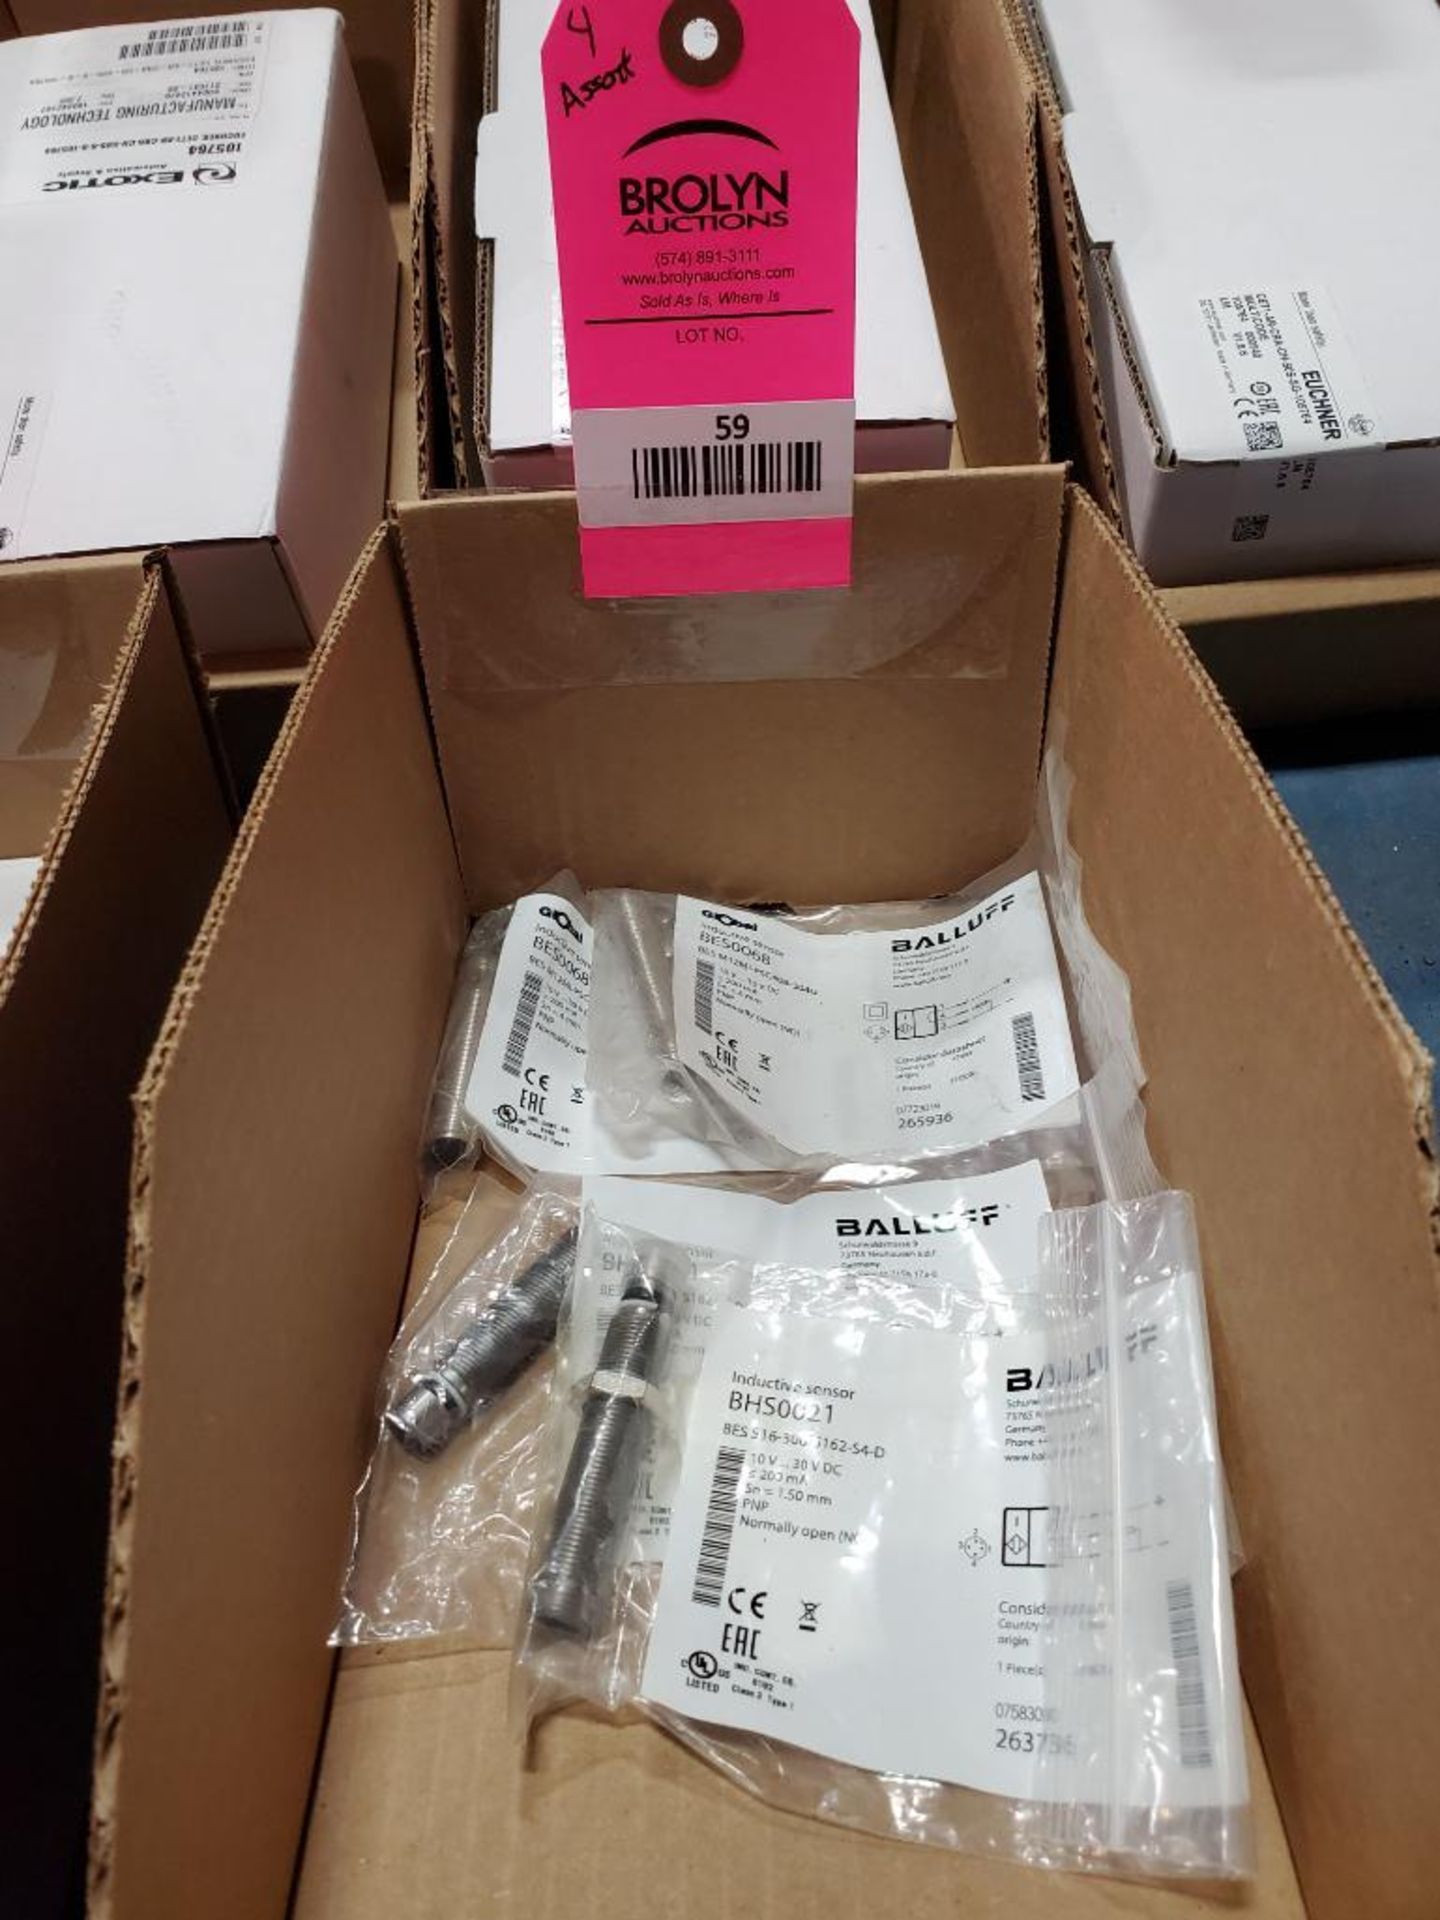 Qty 4 - Assorted Balluff inductive sensor. BES0068, BHS0021. New in package.